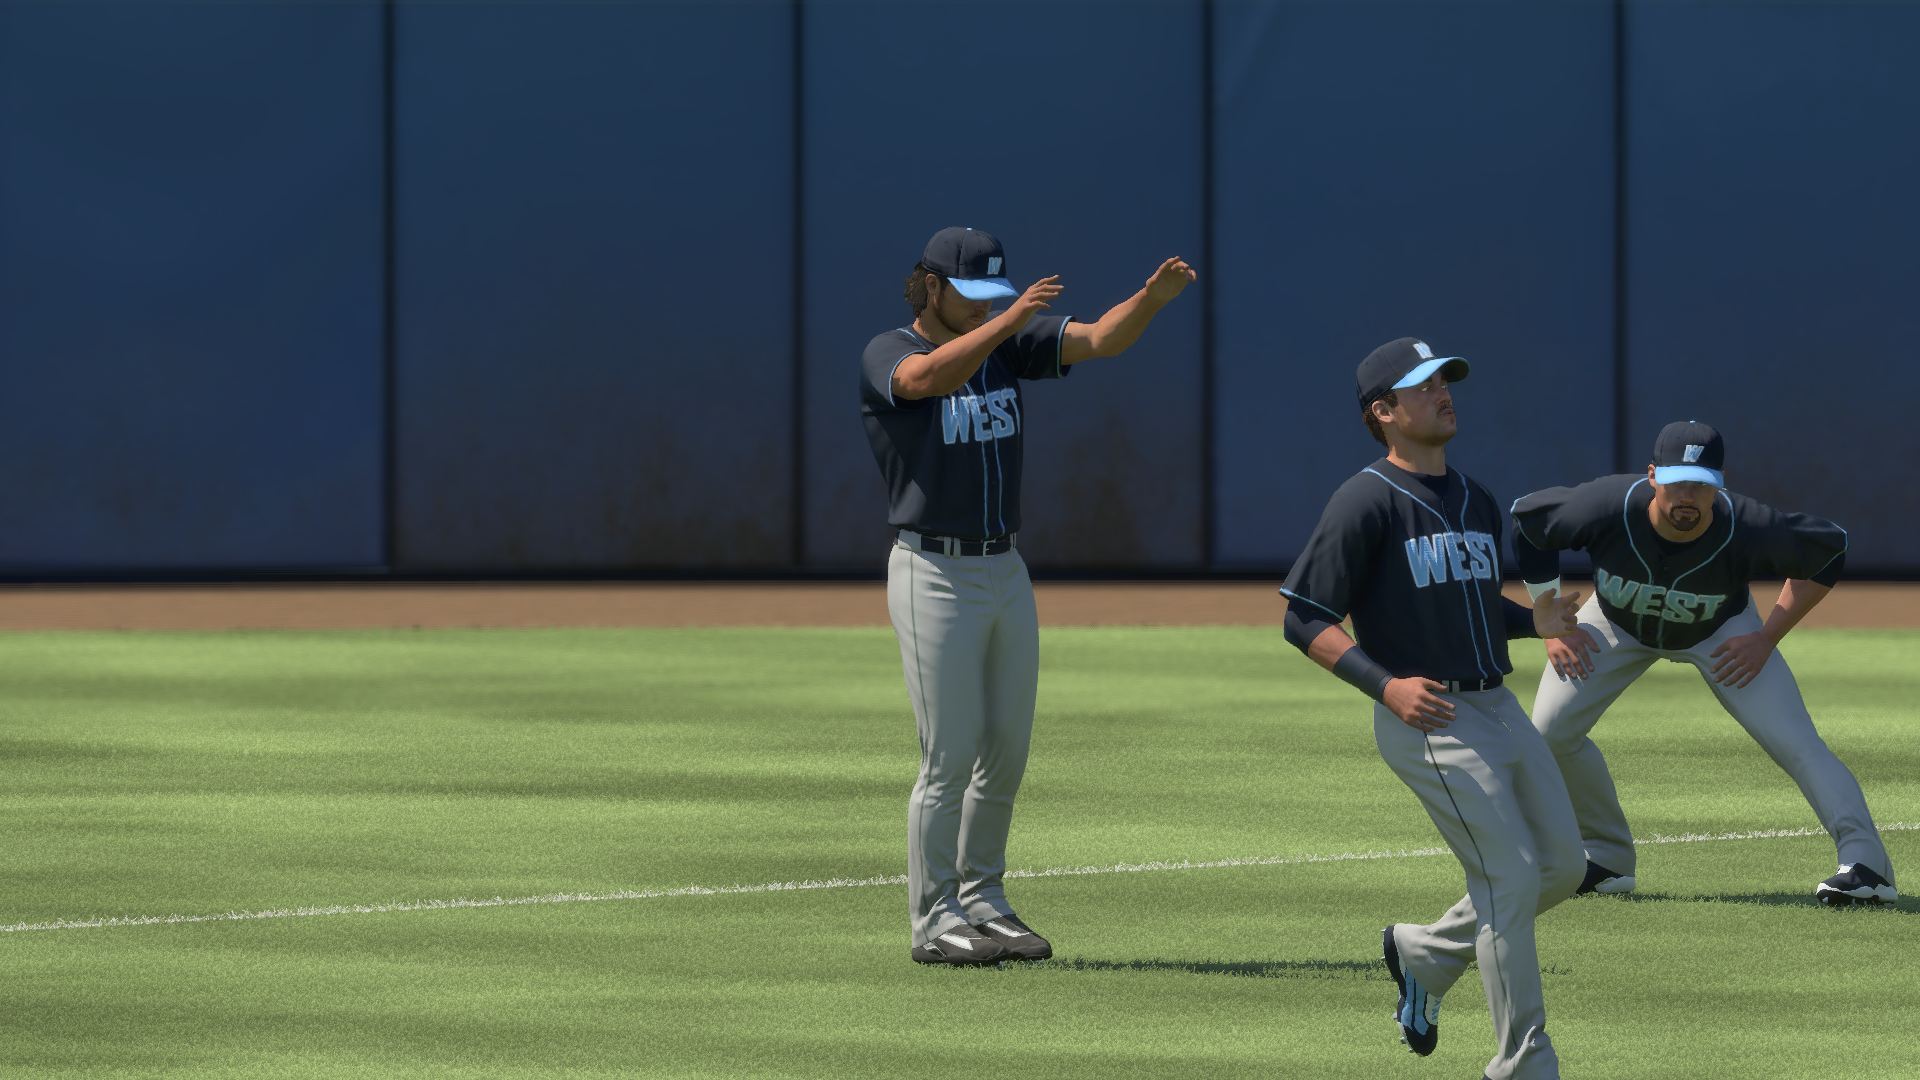 Mlb The Show 16 Review 31